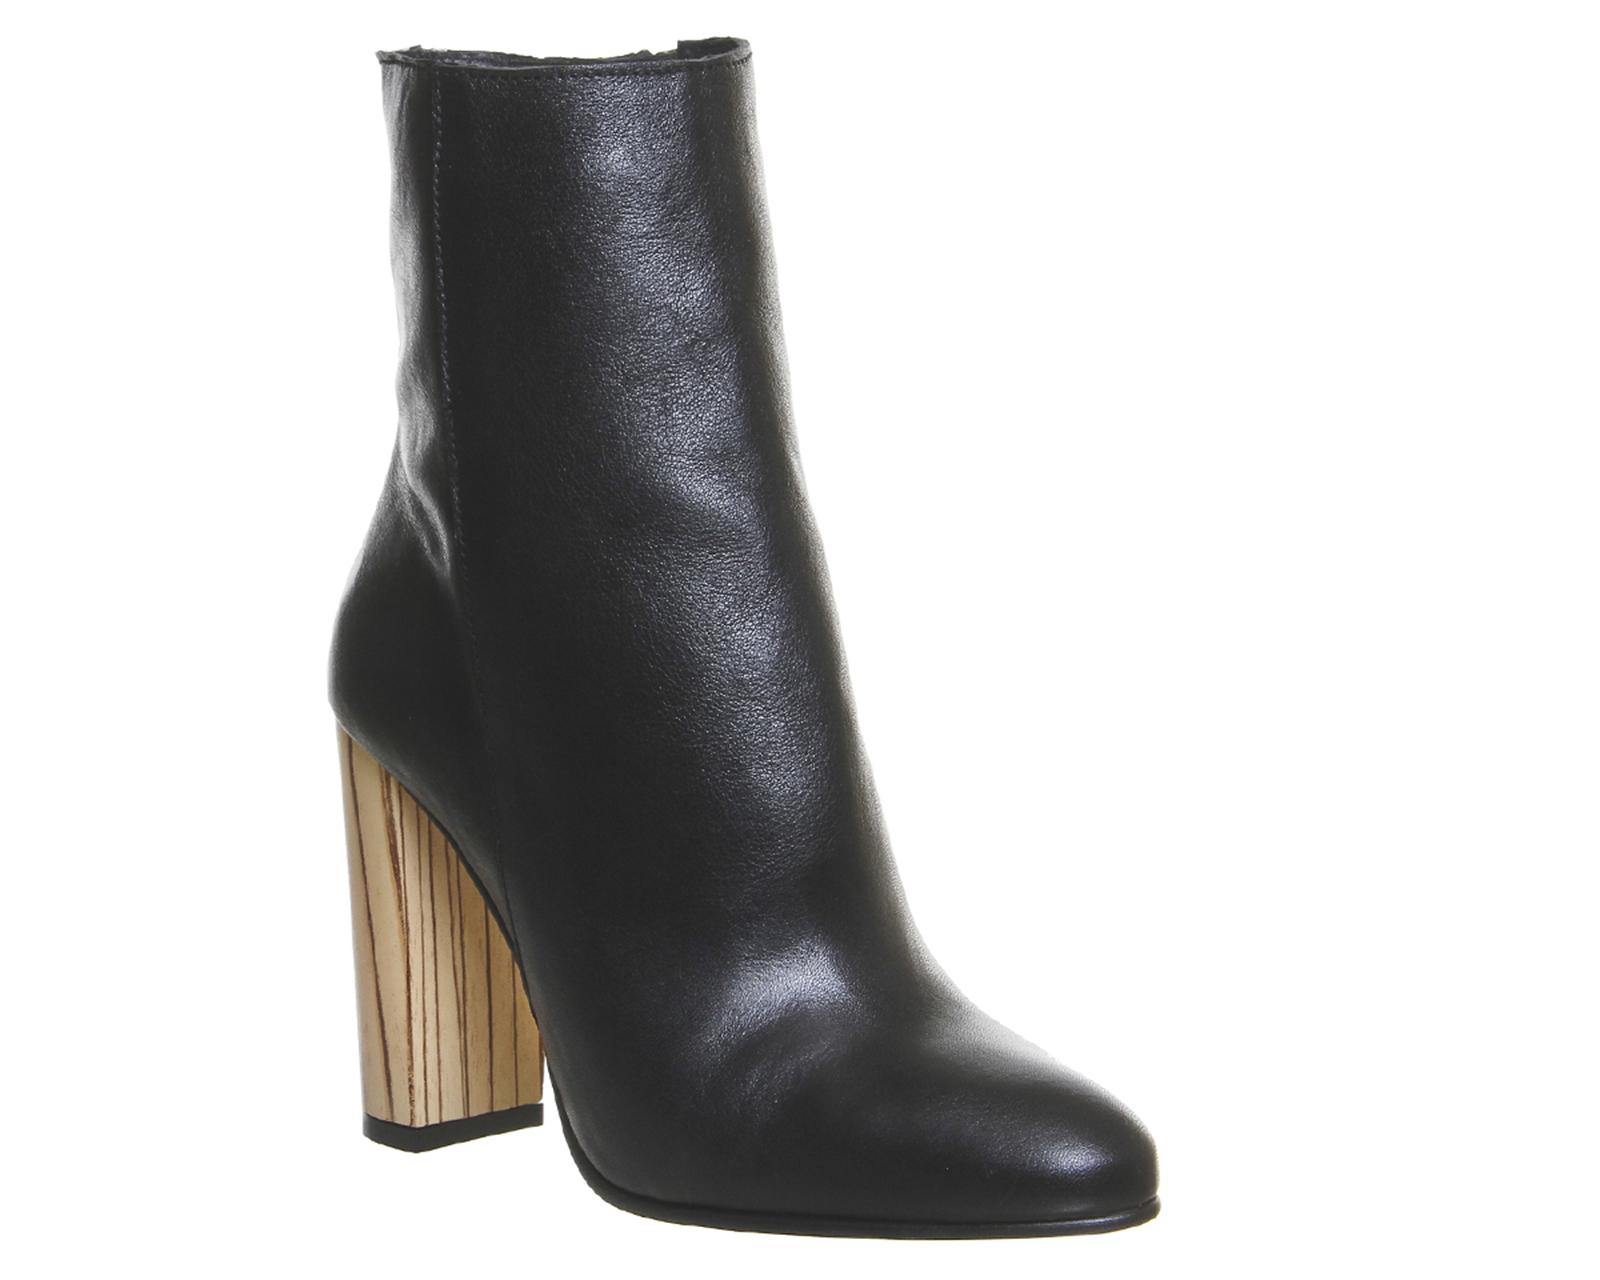 OFFICEImmense High Cut Ankle BootBlack Leather Wood Effect Heel